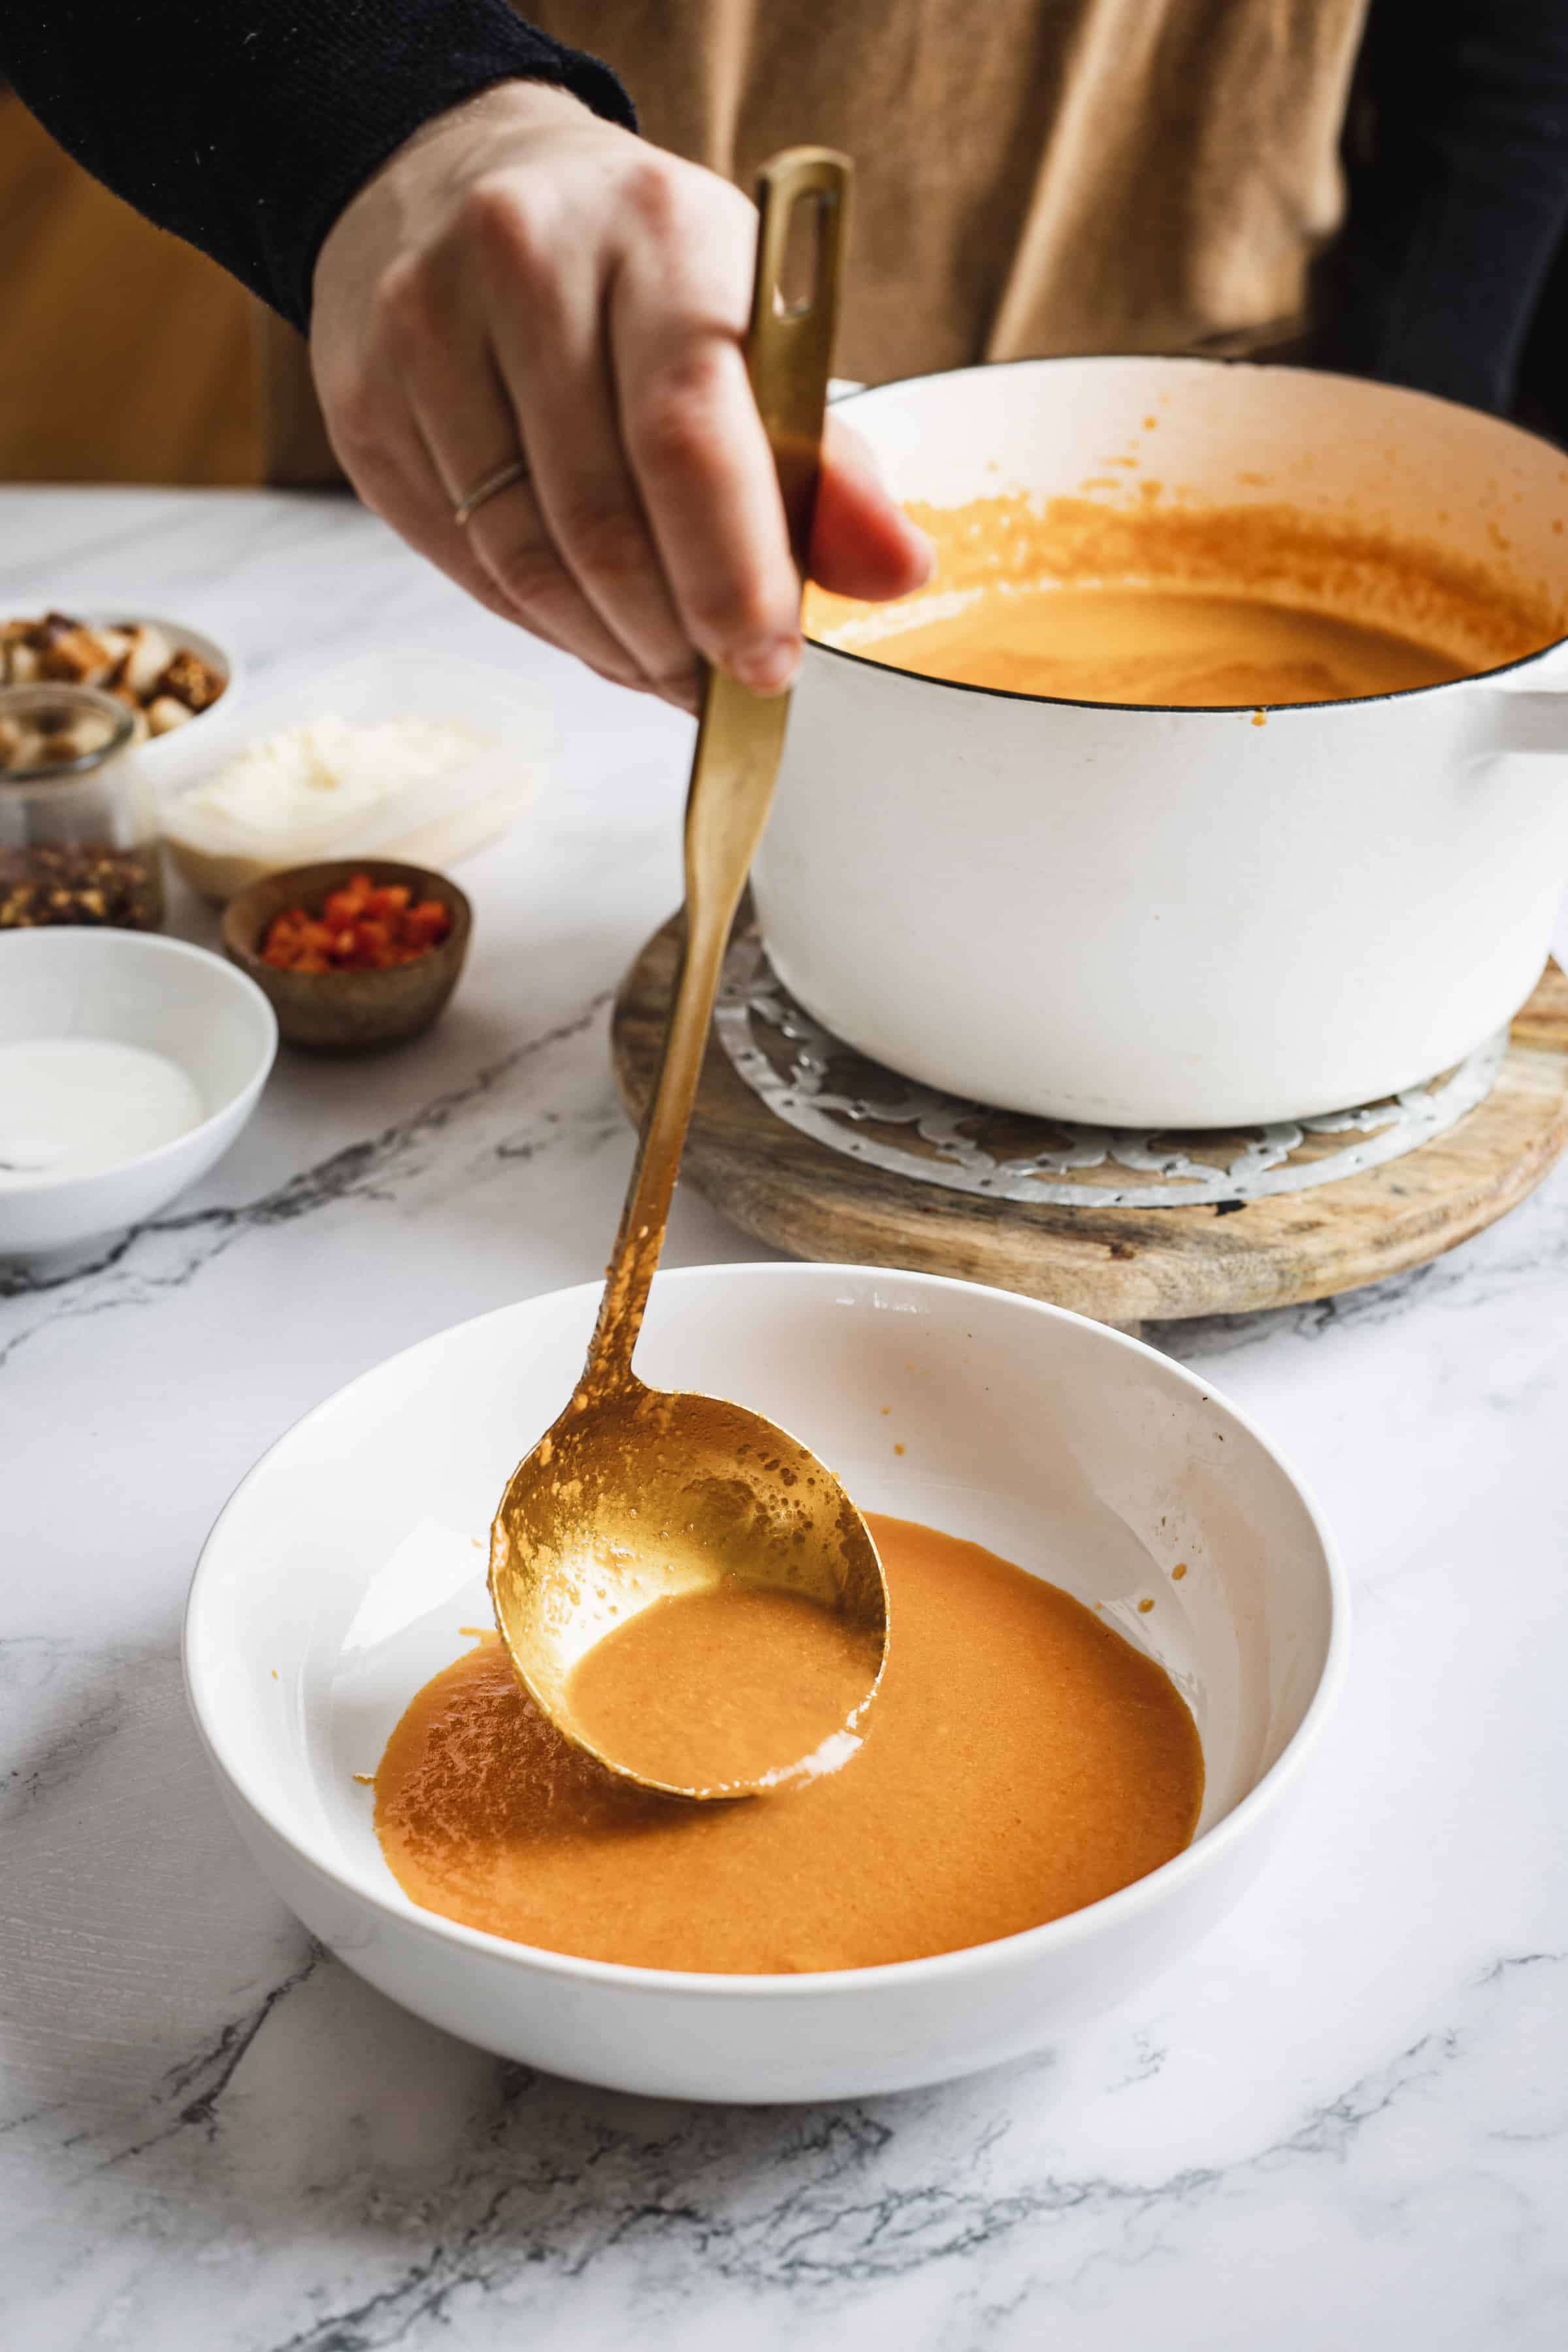 A person serving bell pepper bisque from a white pot into a bowl using a golden ladle, with ingredients like cream and spices visible on the marble countertop.